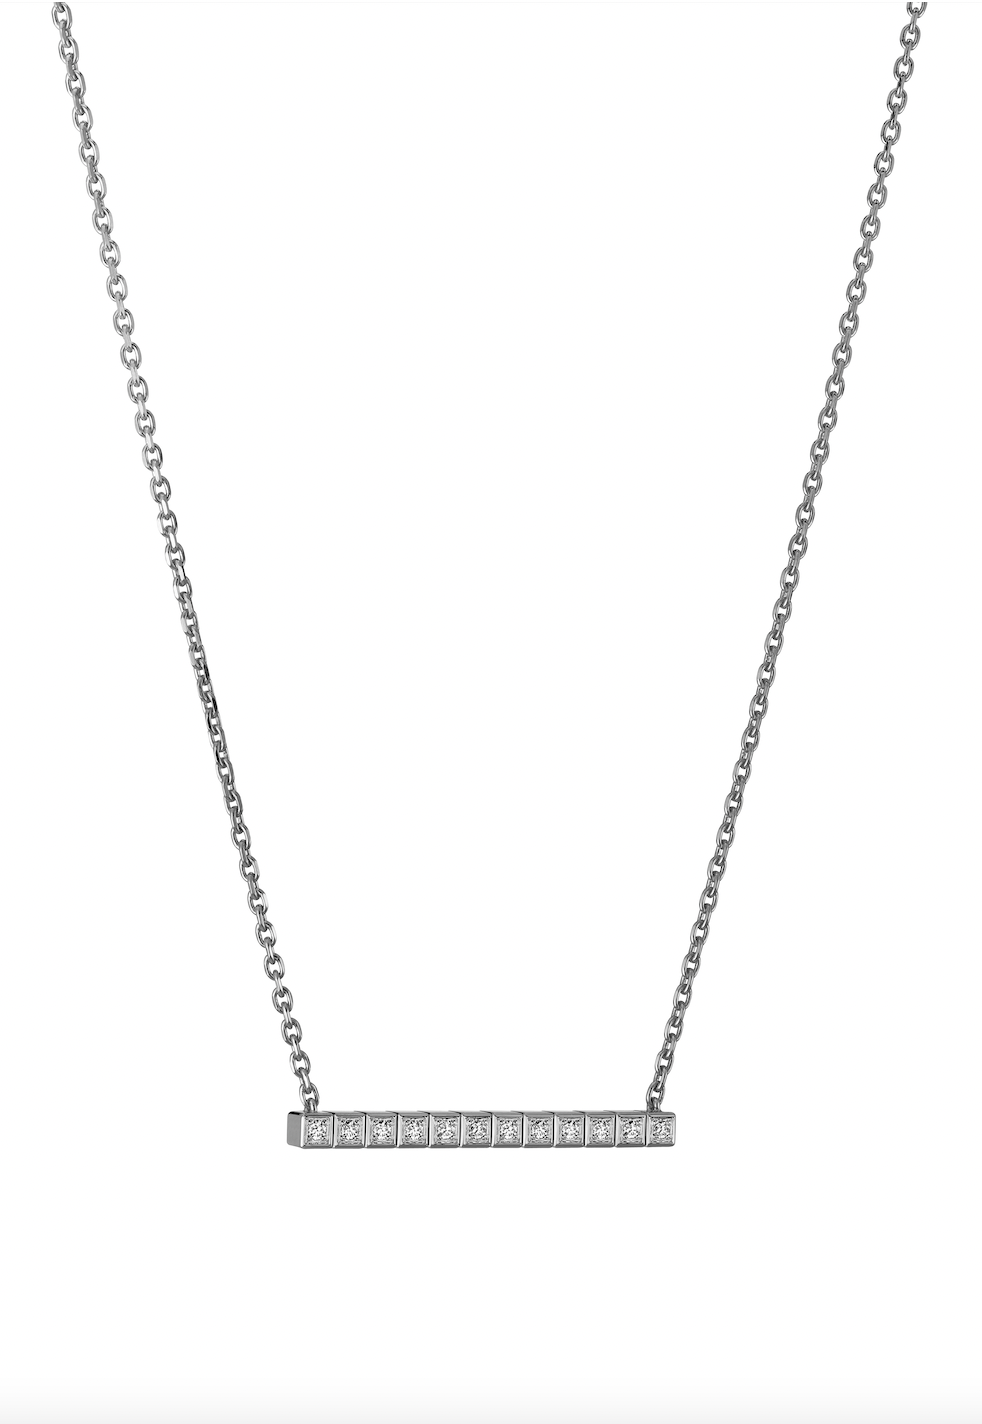 Rich & Famous Necklace-Brand New-Comes In Gift Box-ONLY $2 Premier Designs